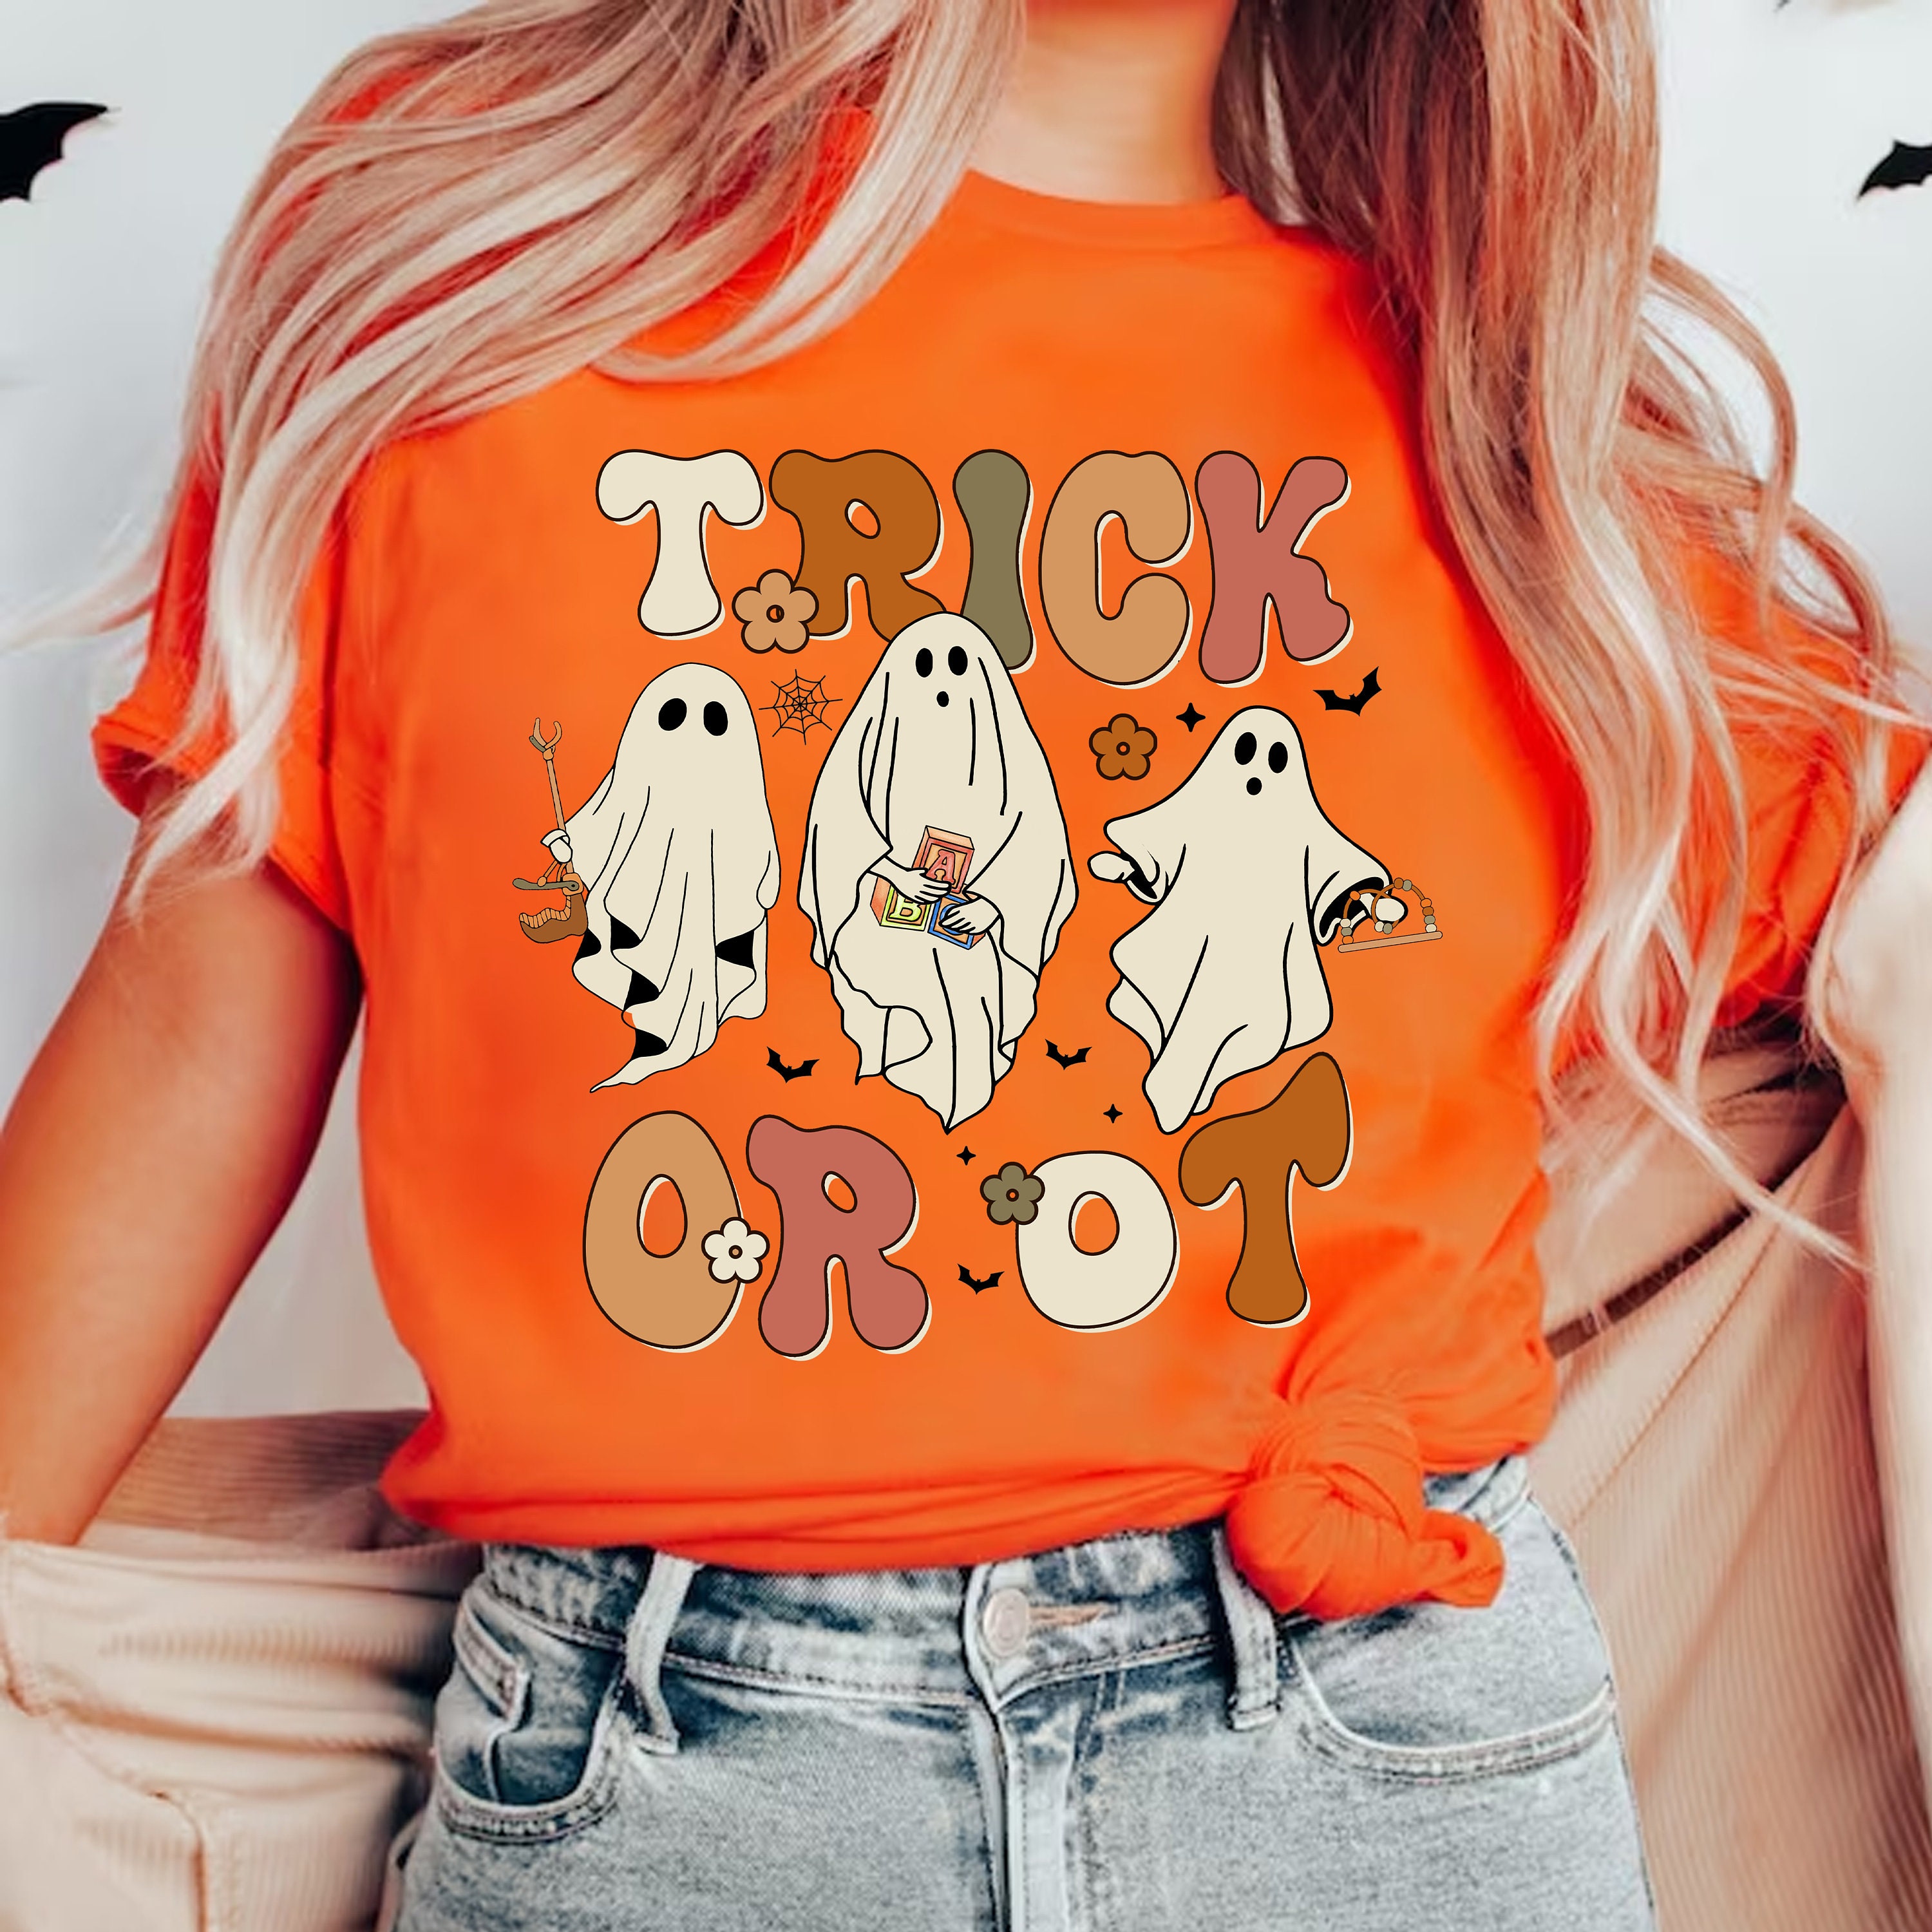 Discover Trick Or OT Shirt, Trick or Occupational Shirt, Halloween OT Shirt, Occupational Therapy Halloween, Ot Gifts, Halloween Tee, Spooky OT